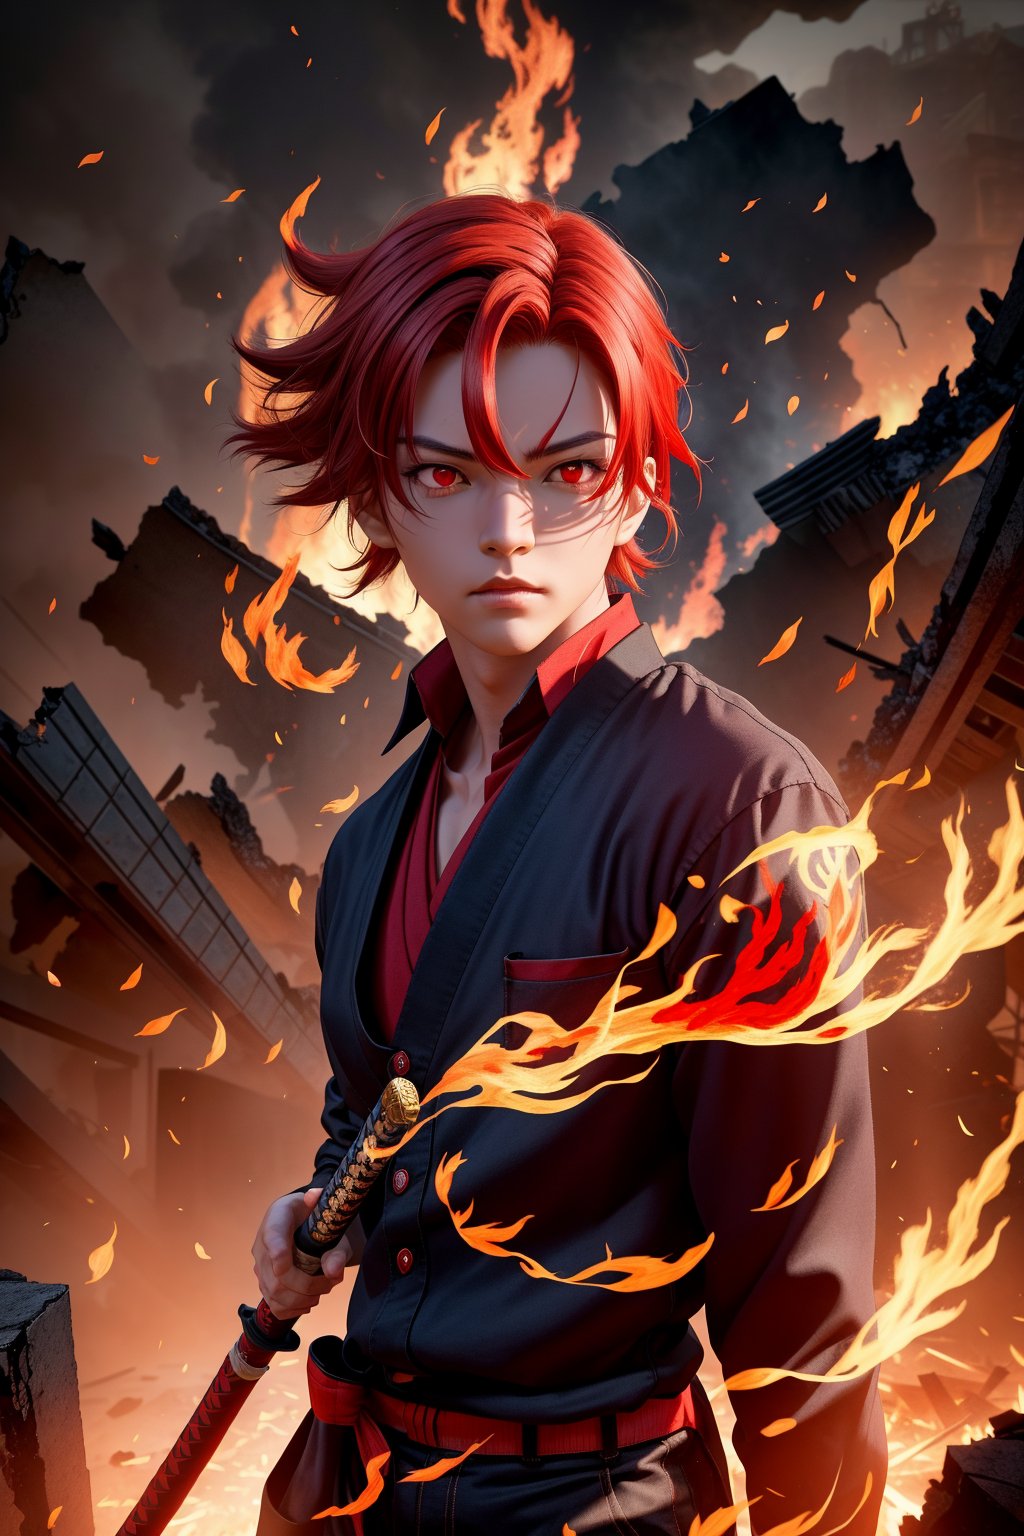 character sheet, phoenix in background, dark skin, red_hair, short hair, red eyes, held red and dark blue, flaming  katana, in a destroyed old city, perfect face, perfect eyes, 3D anime style, beautiful, boy, ultra detailed, power aura, dynamic pose, dynamic view, beautiful, 